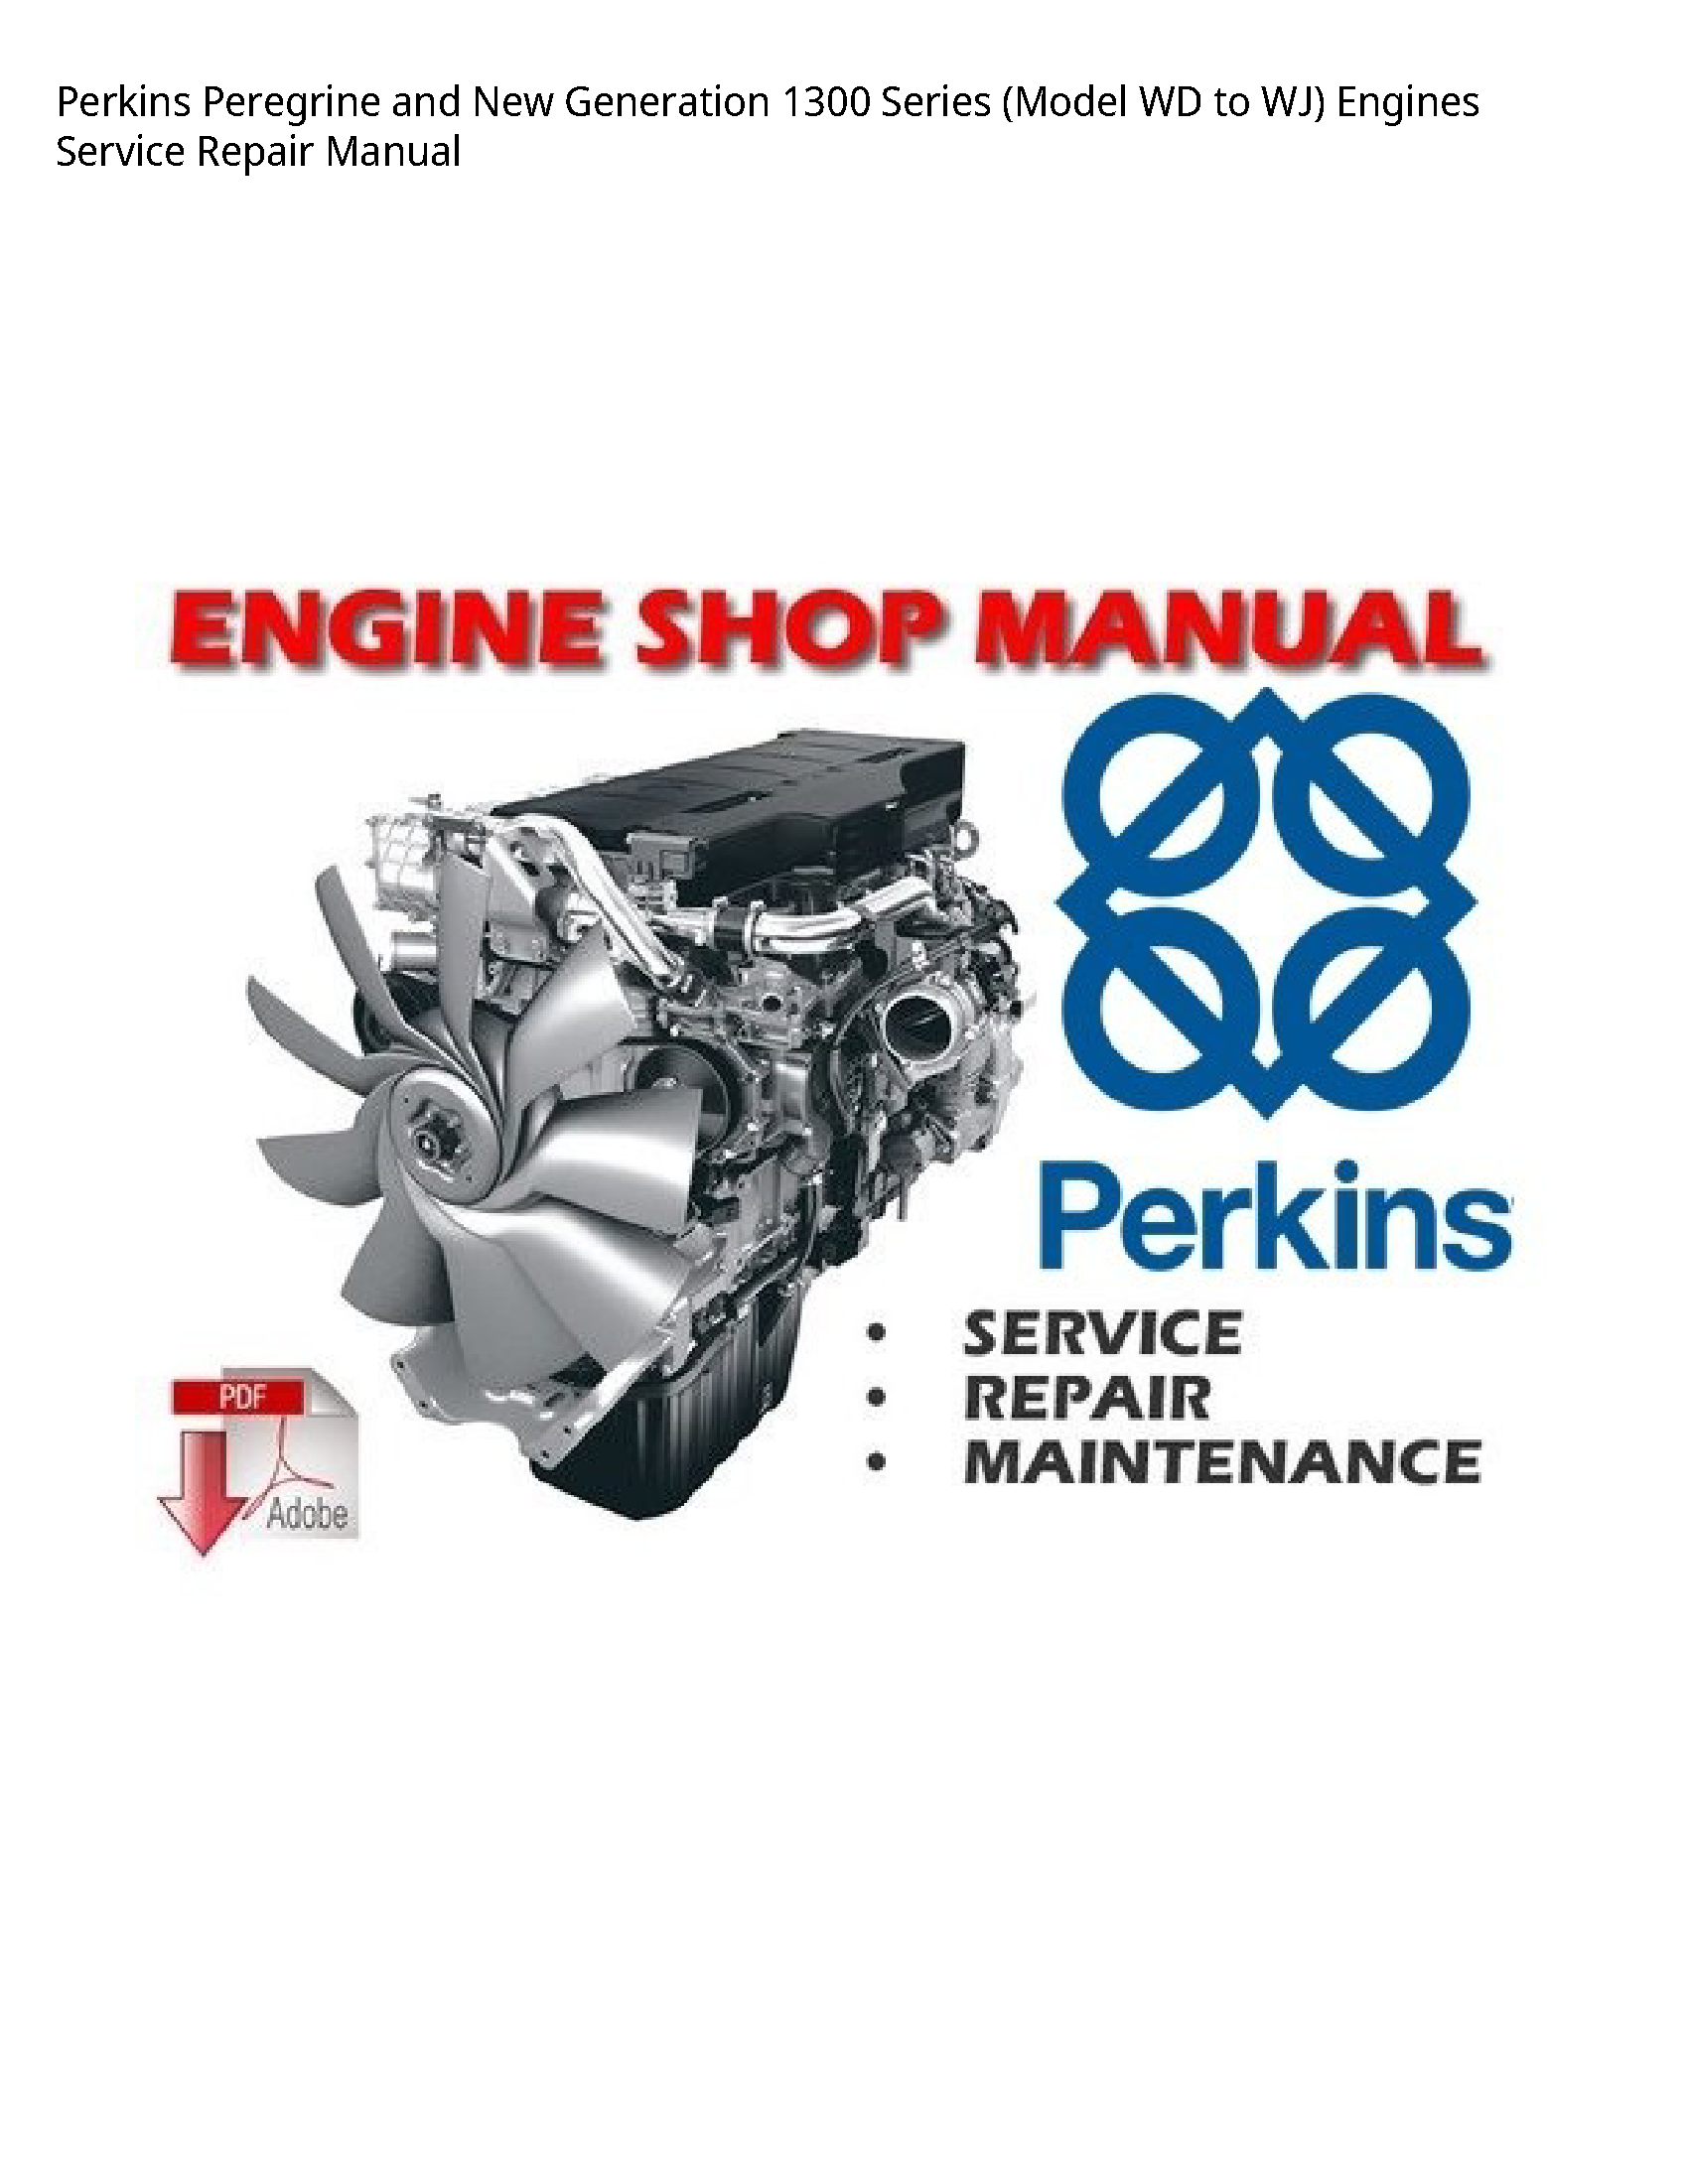 Perkins 1300 Peregrine  New Generation Series (Model WD to WJ) Engines manual